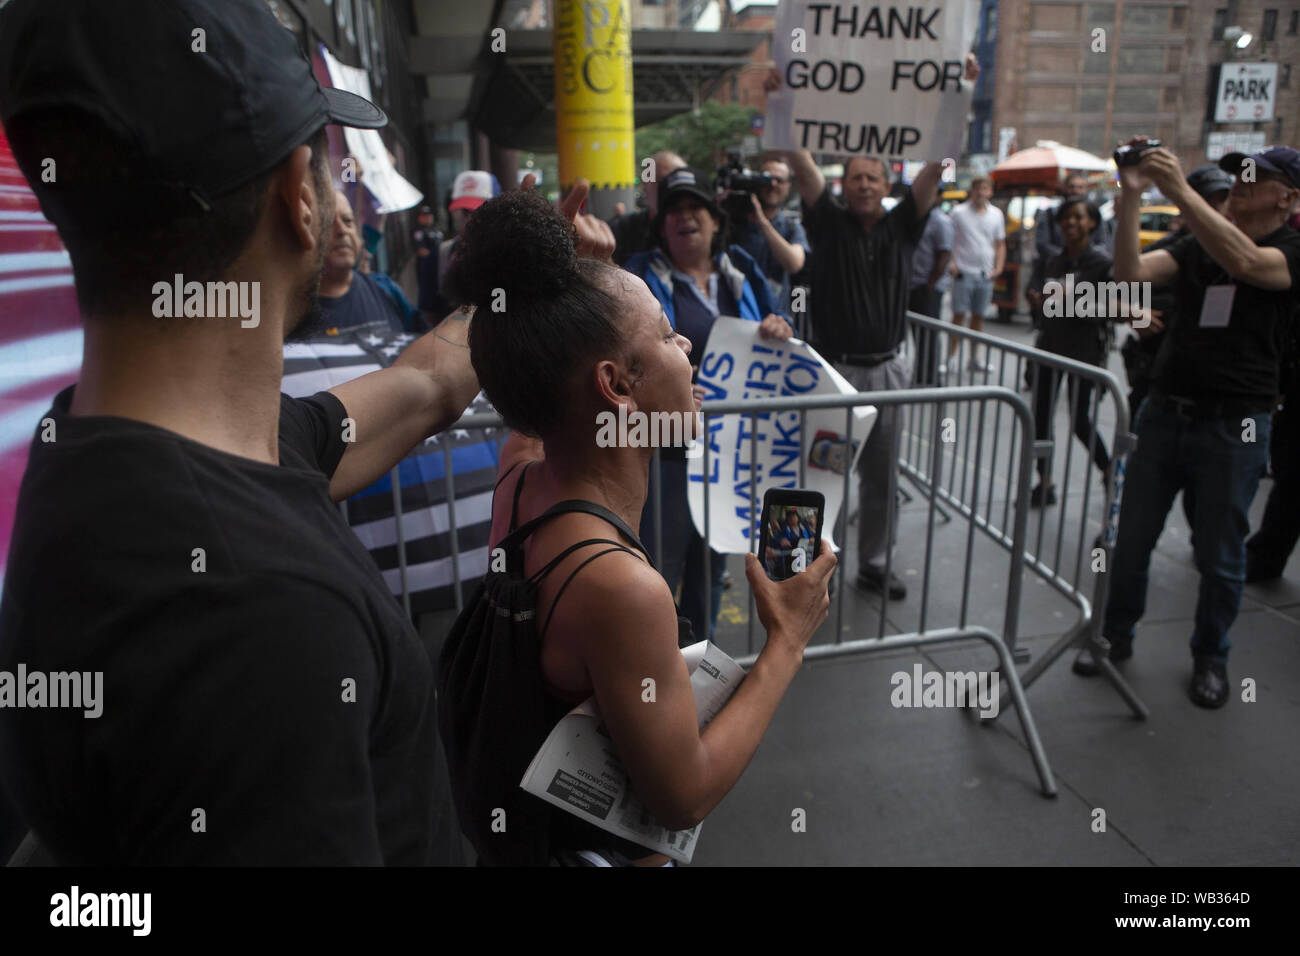 August 13, 2019: Demonstrators are shown protesting against Greyhound Corporation and ICE (Immigration Customs and Enforcement) and confronting anti-protestors and Trump supporters at the Port Authority Bus Terminal on 42nd and 8th Avenue in New York, New York. About 100 activists from a coalition of groups including FIRE (Fight For Immigrant Refugees Everywhere) protested Greyhound allowing ICE agents to board their busses 'searching for migrants,'' officials said. Credit: Brian Branch Price/ZUMA Wire/Alamy Live News Stock Photo